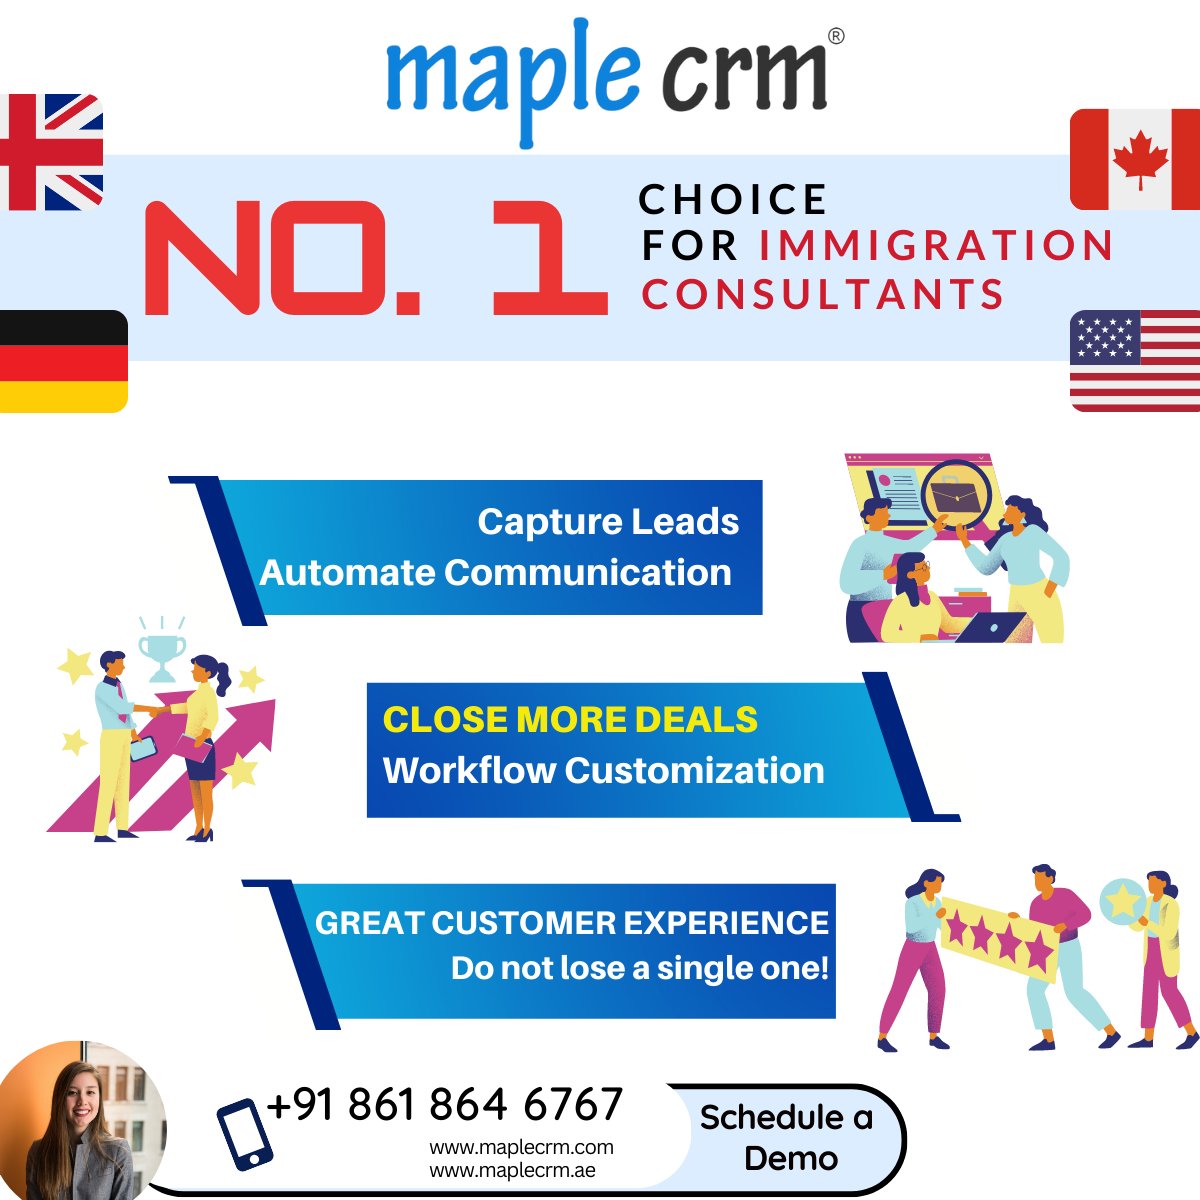 Why Maple CRM is the best choice for immigration consultants?? Check 3 major reasons:

#maplecrm #crm #crmsoftware #immigration #canadaimmigration #canadaworkpermit #australiaimmigration #overseaseducationconsultants #overseaseducationconsultant #leadmanagement